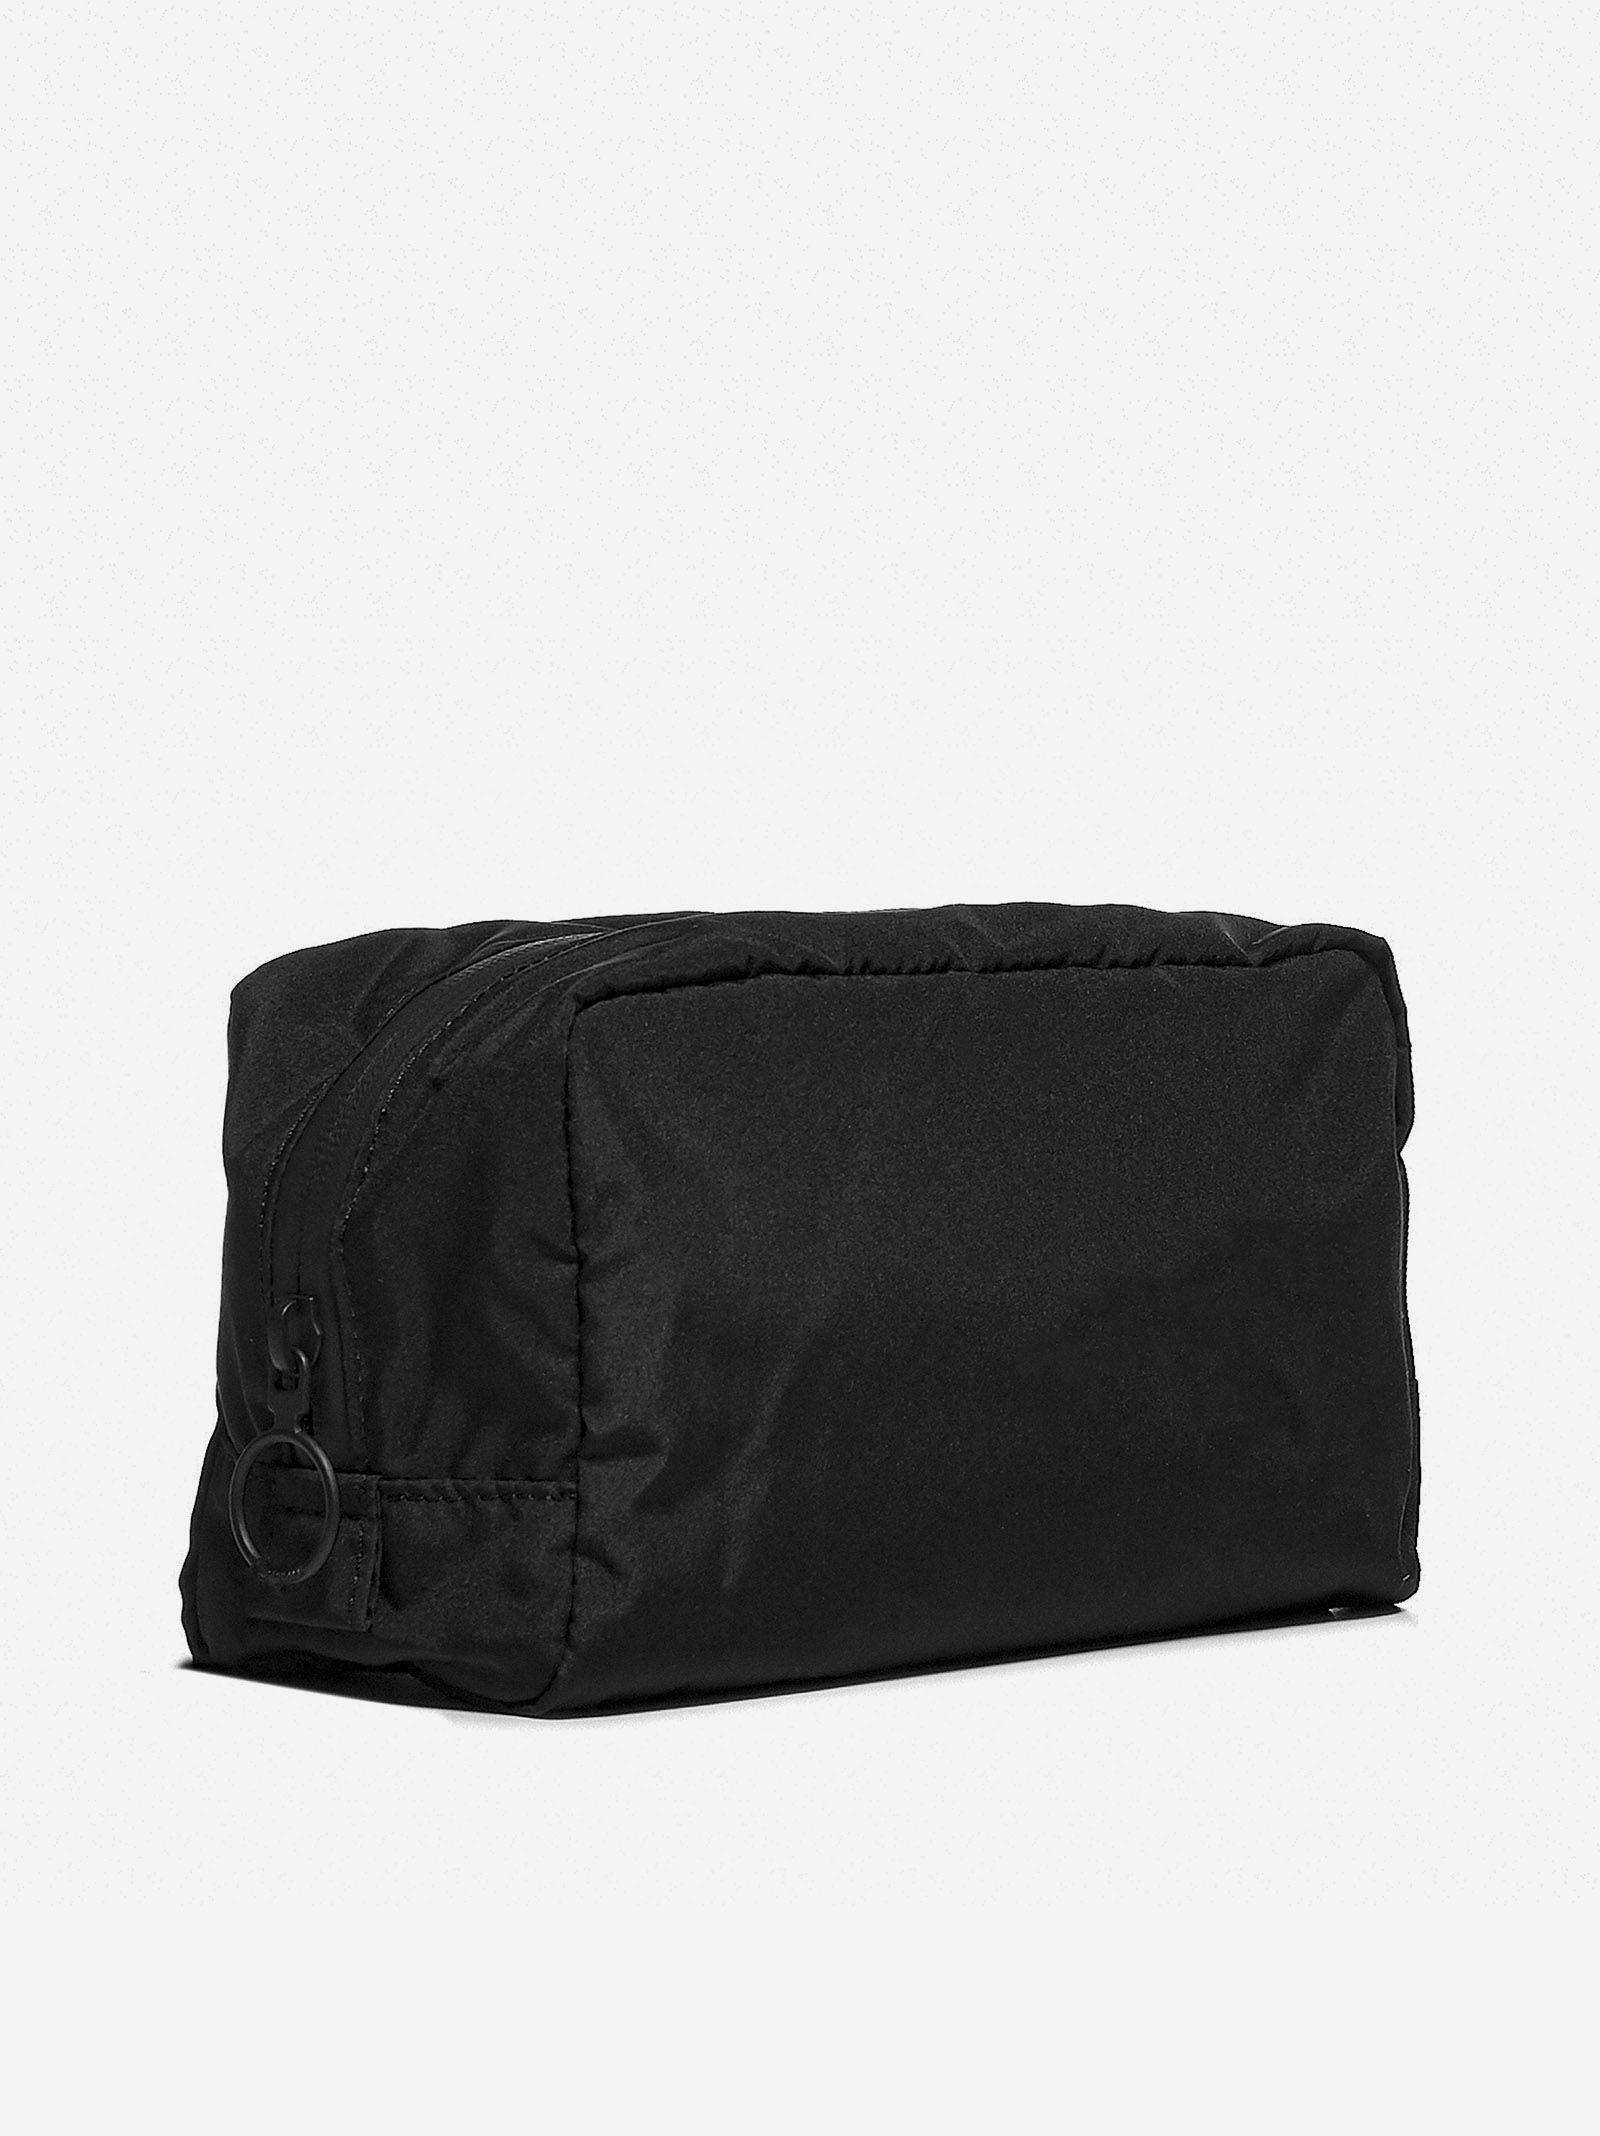 Off-White c/o Virgil Abloh Make Up Print Pouch in Black | Lyst